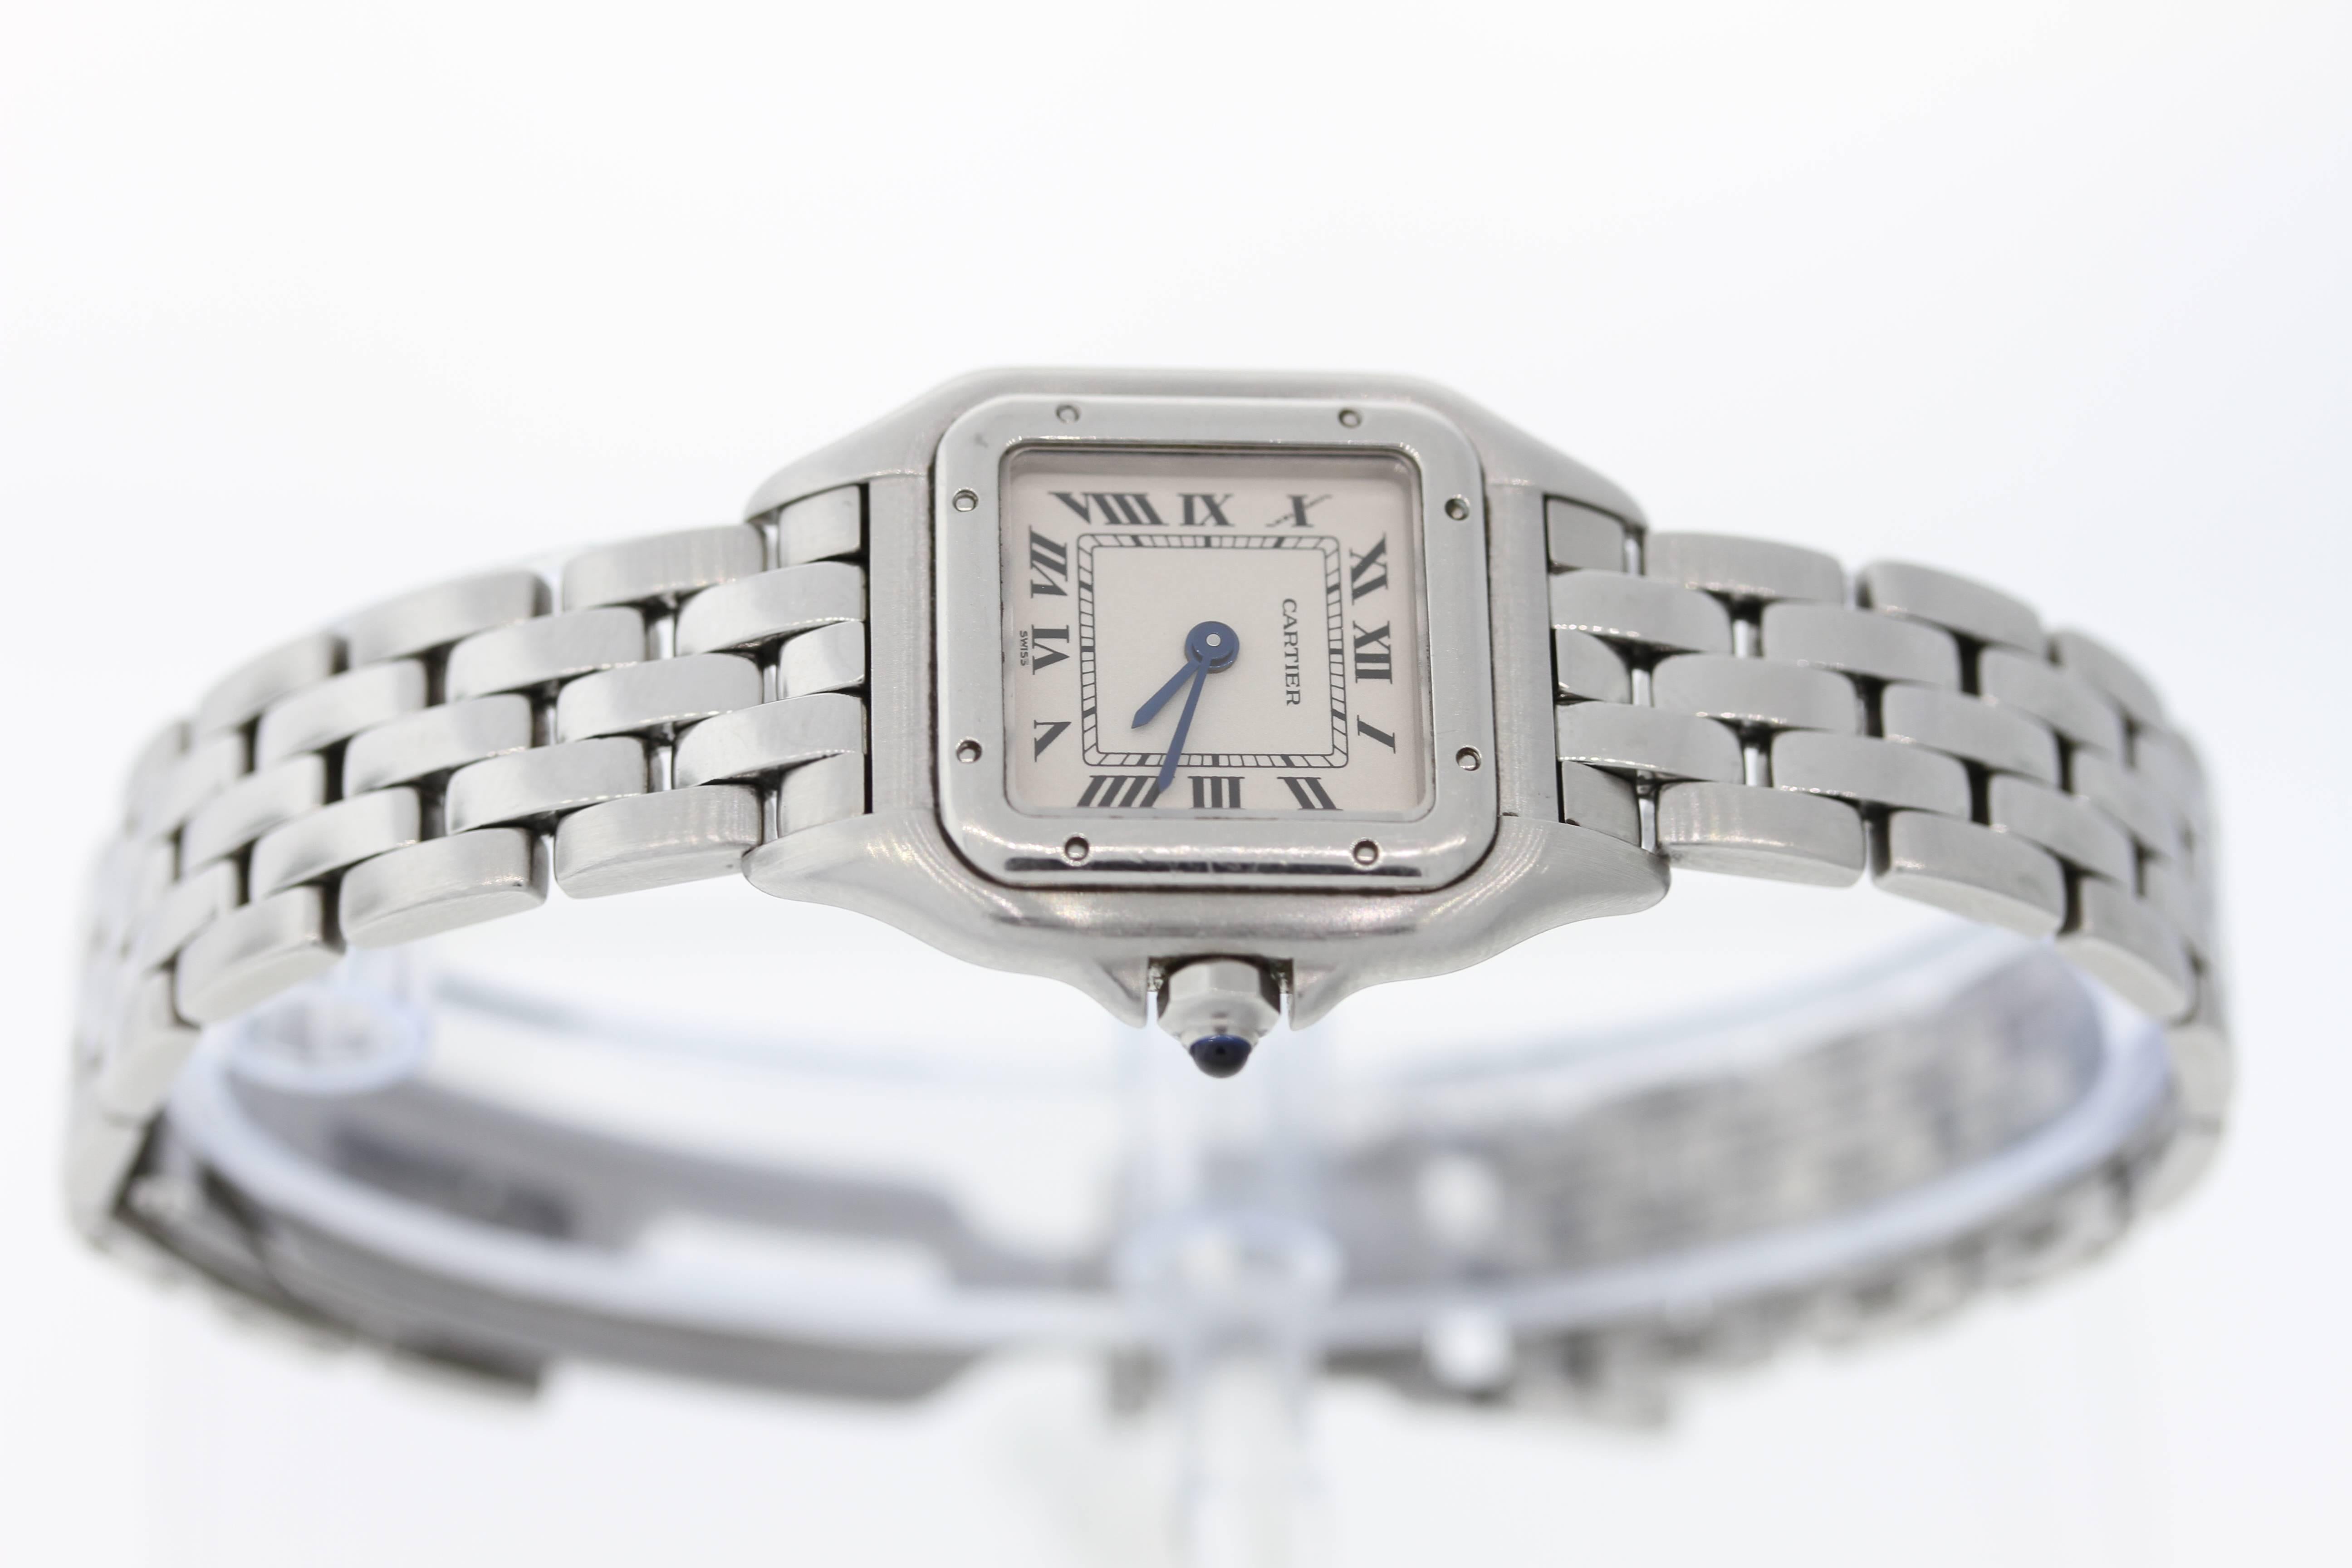 Brand Name: Cartier
Style Number: 31735
Style Name: Panthere
Color Name (Dial): Ivory Roman
Country of Manufacture: Switzerland
Gender: Womens
Strap Material: Stainless Steel
Case Metal: Stainless Steel
Movement Type: Quartz
Crystal Type: